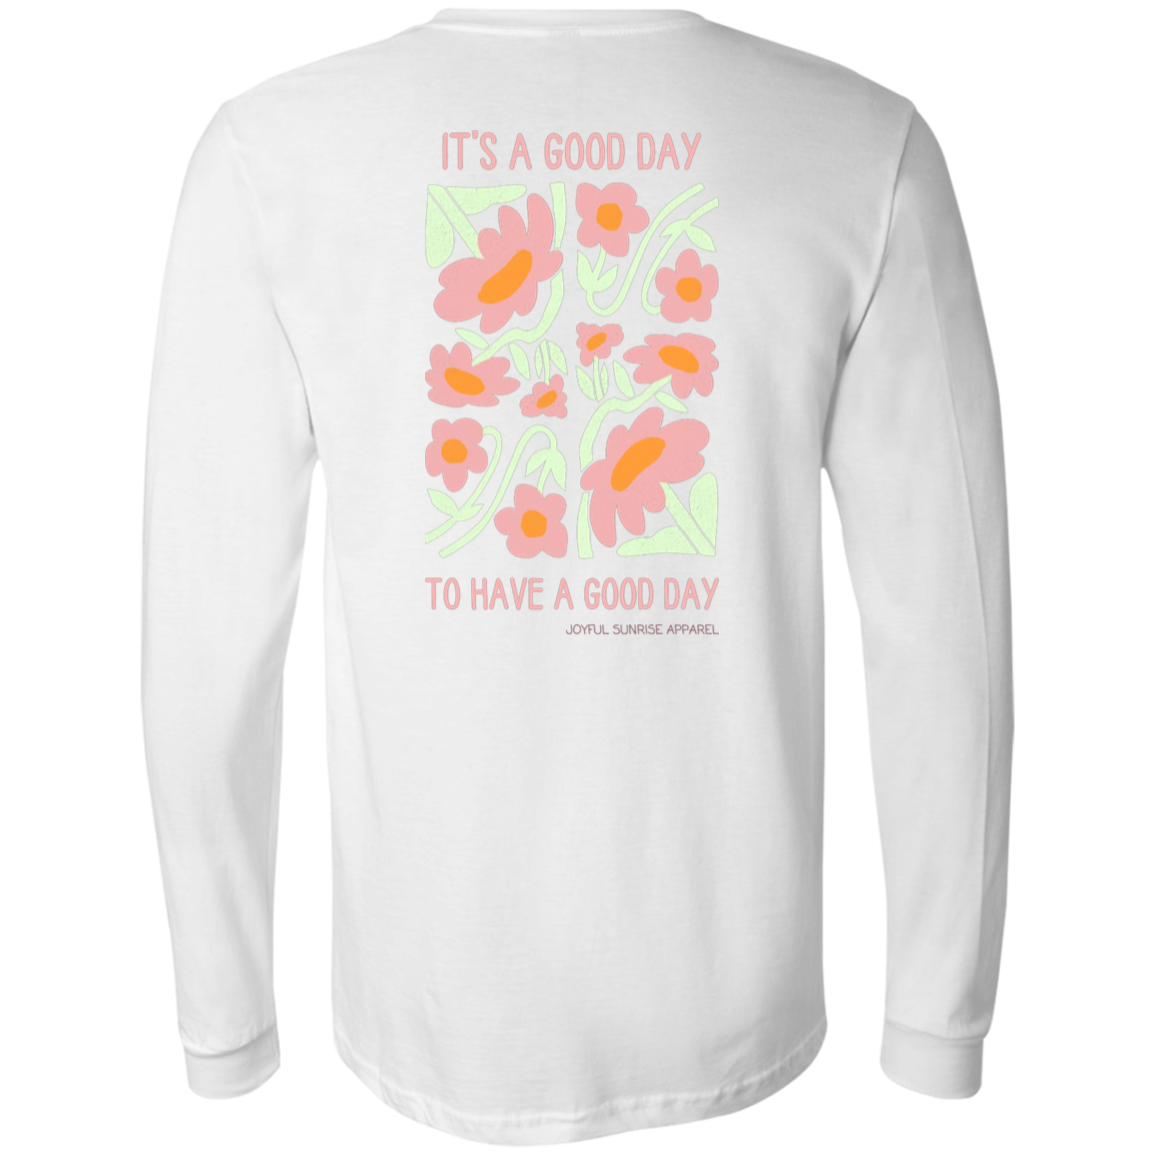 It's a good day to have a good day - Long Sleeve T-Shirt